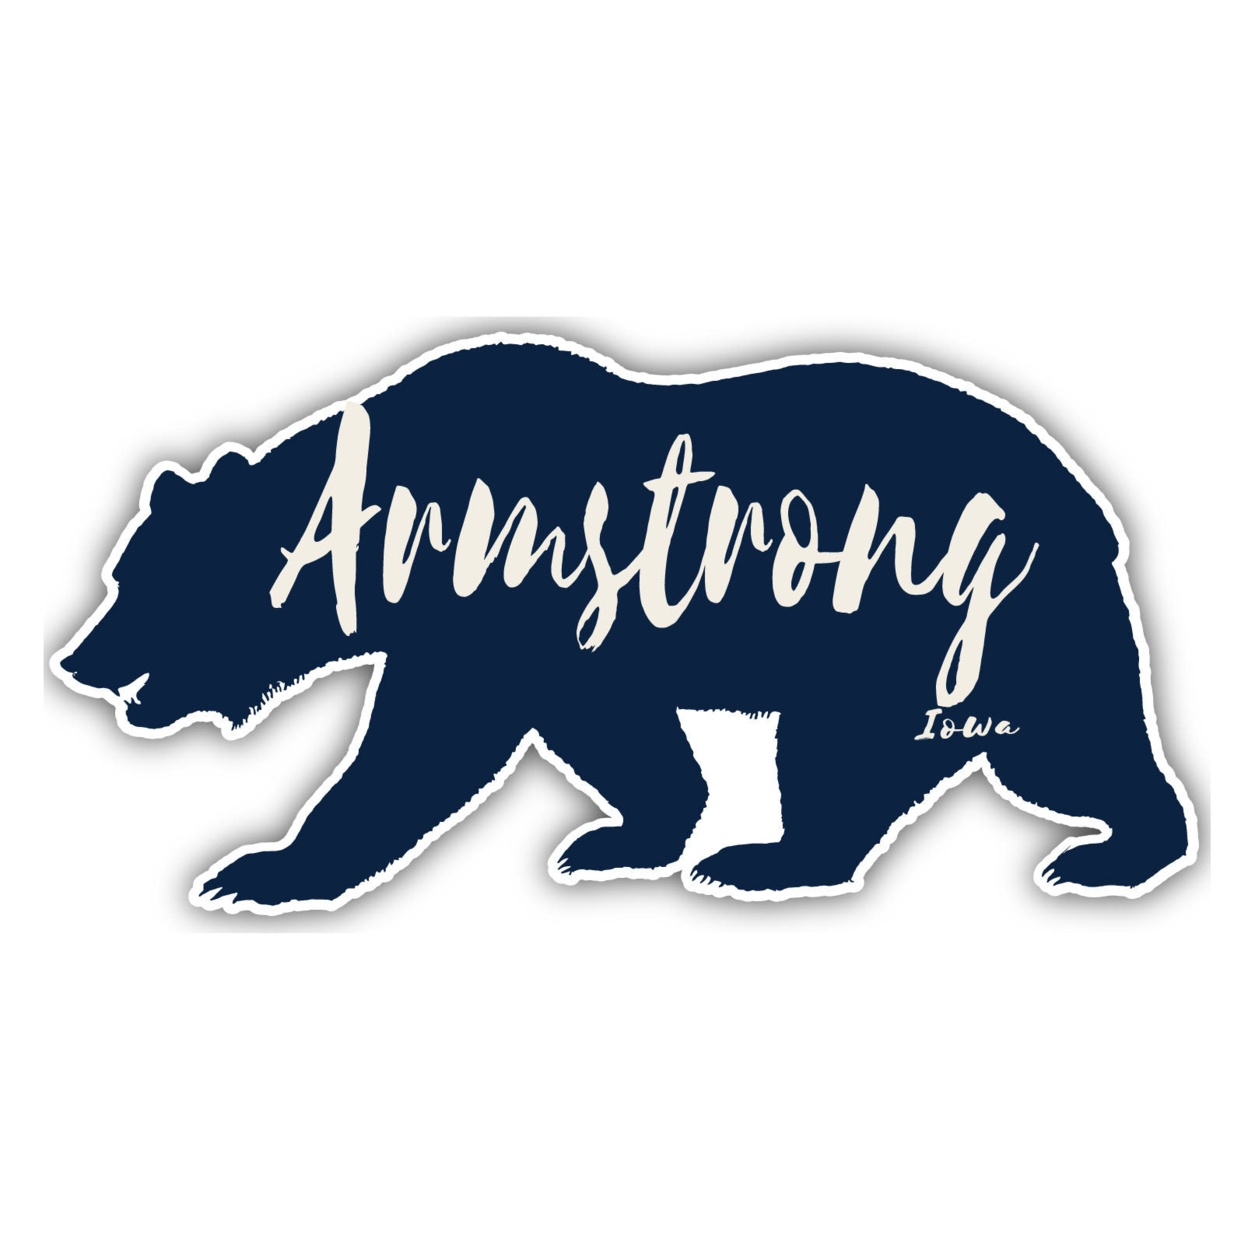 Armstrong Iowa Souvenir Decorative Stickers (Choose Theme And Size) - 4-Pack, 4-Inch, Bear